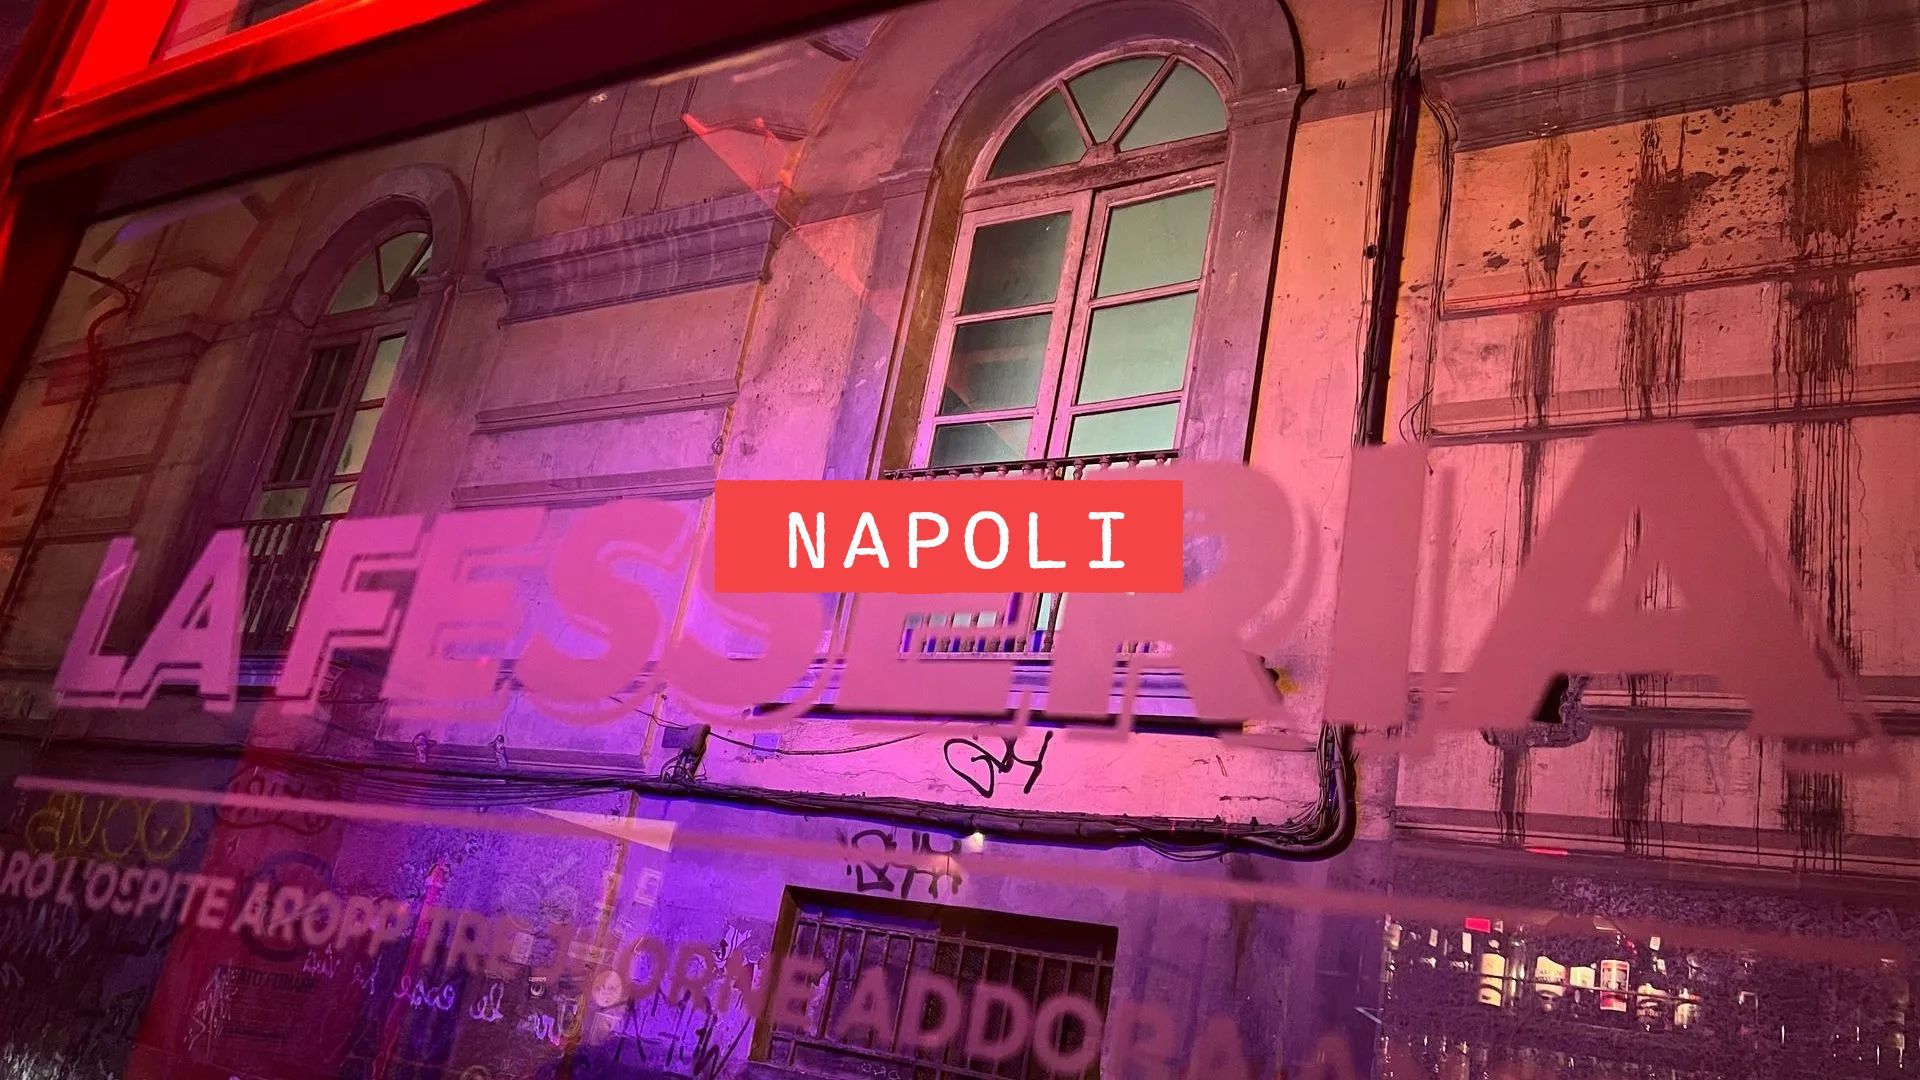 Banner Image City Guide Naples